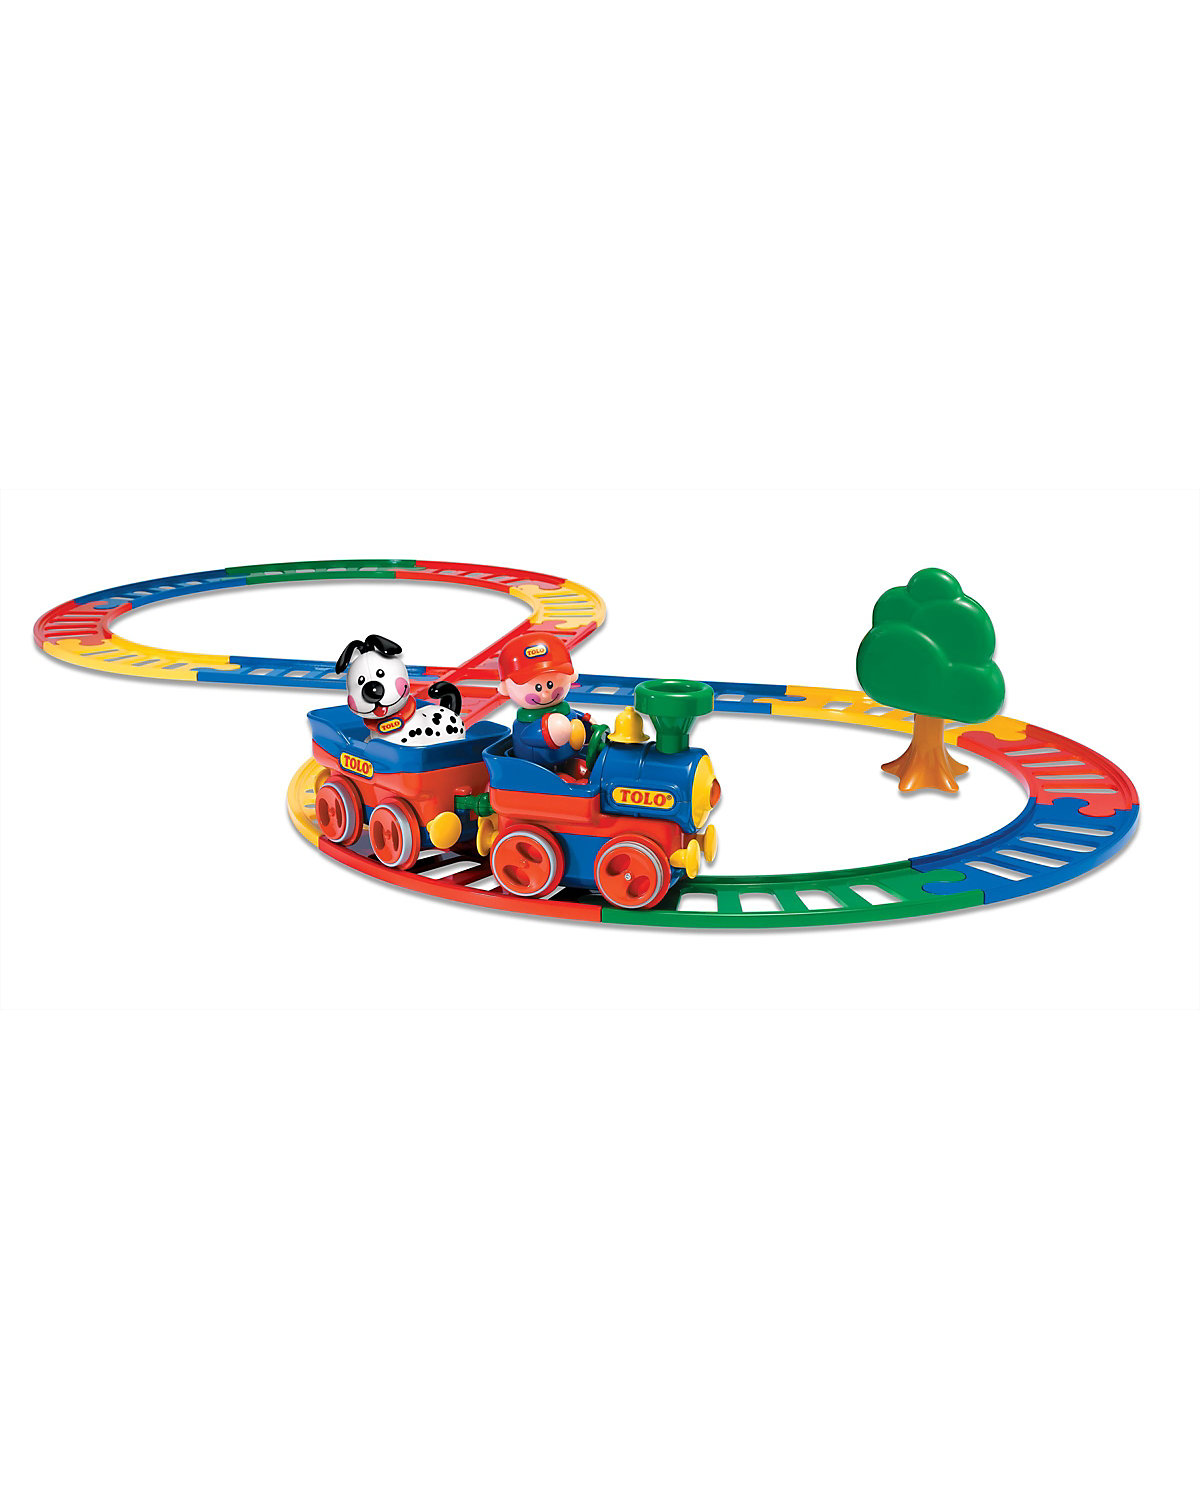 TOLO Toys First Friends Deluxe Train Set by GU7568